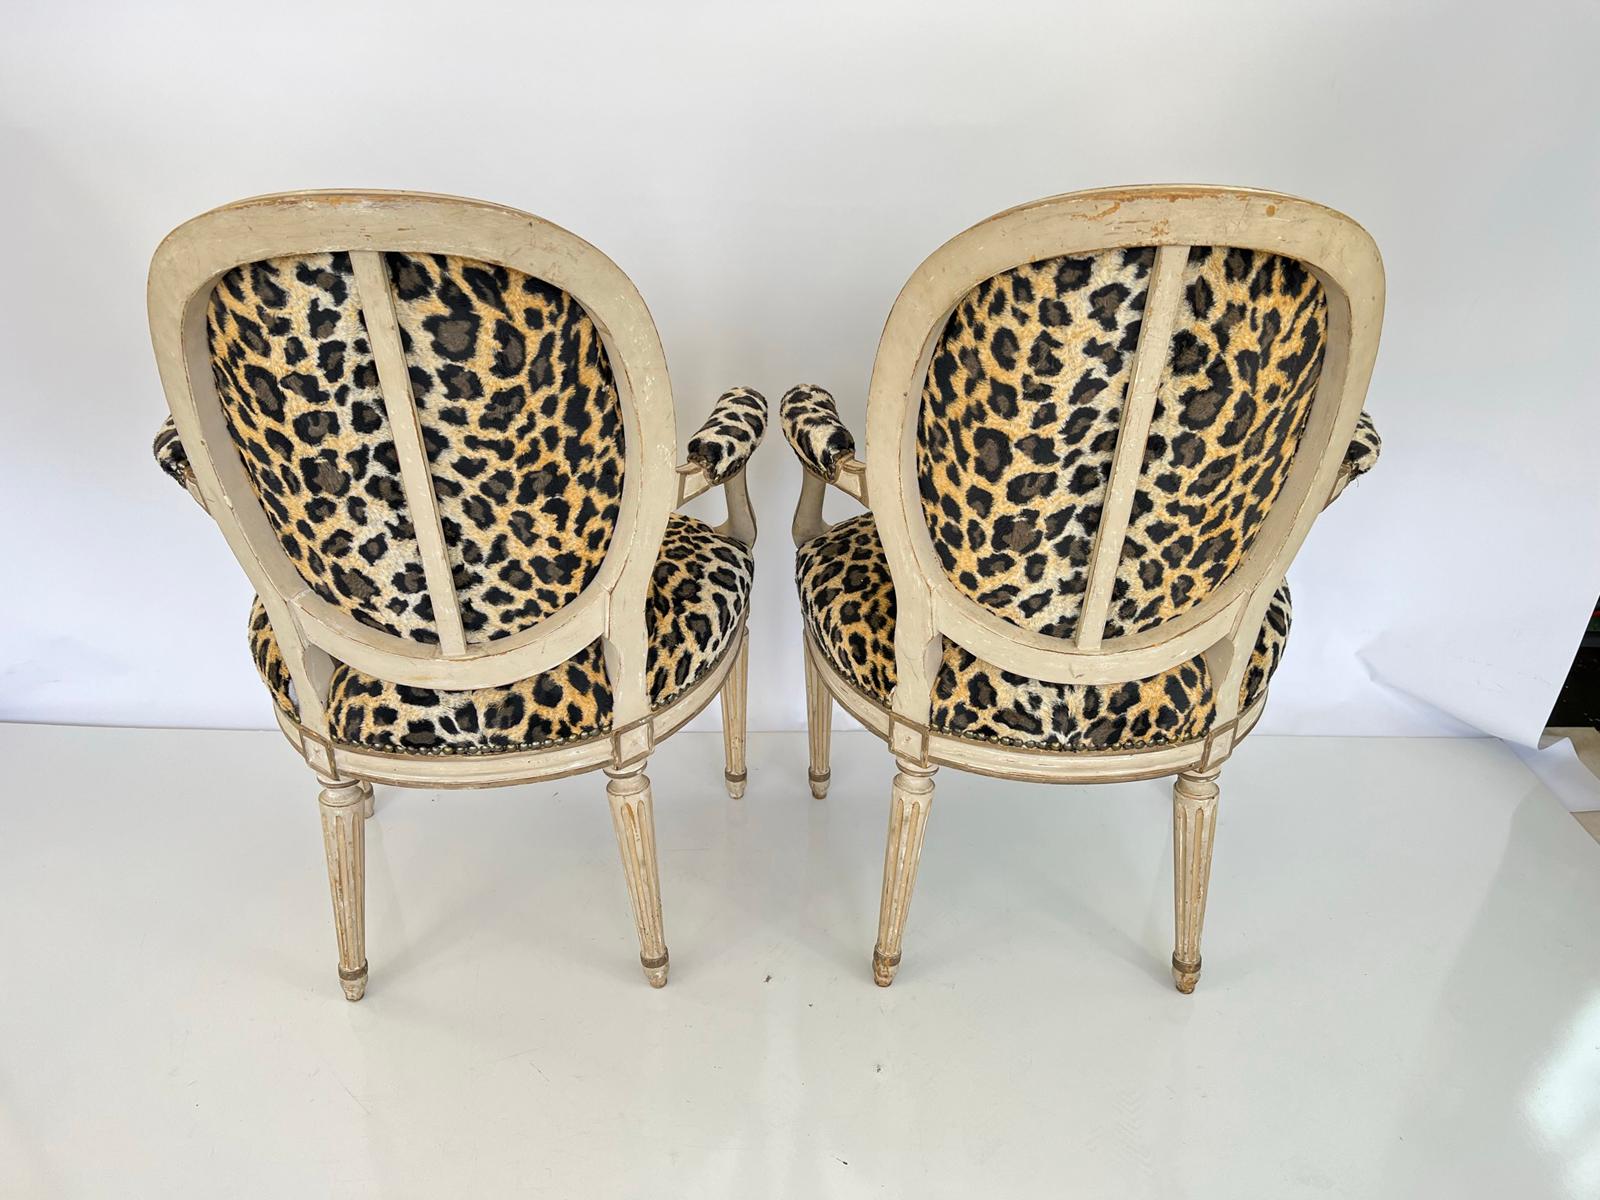 Pair of French armchairs, upholstered in faux leopard print with nailheads. Each chair having a painted, channeled frame, with oval, padded backrest. Its outswept arms with elbow cushions, supported by curvaceous terminals. A generous, crown seat is